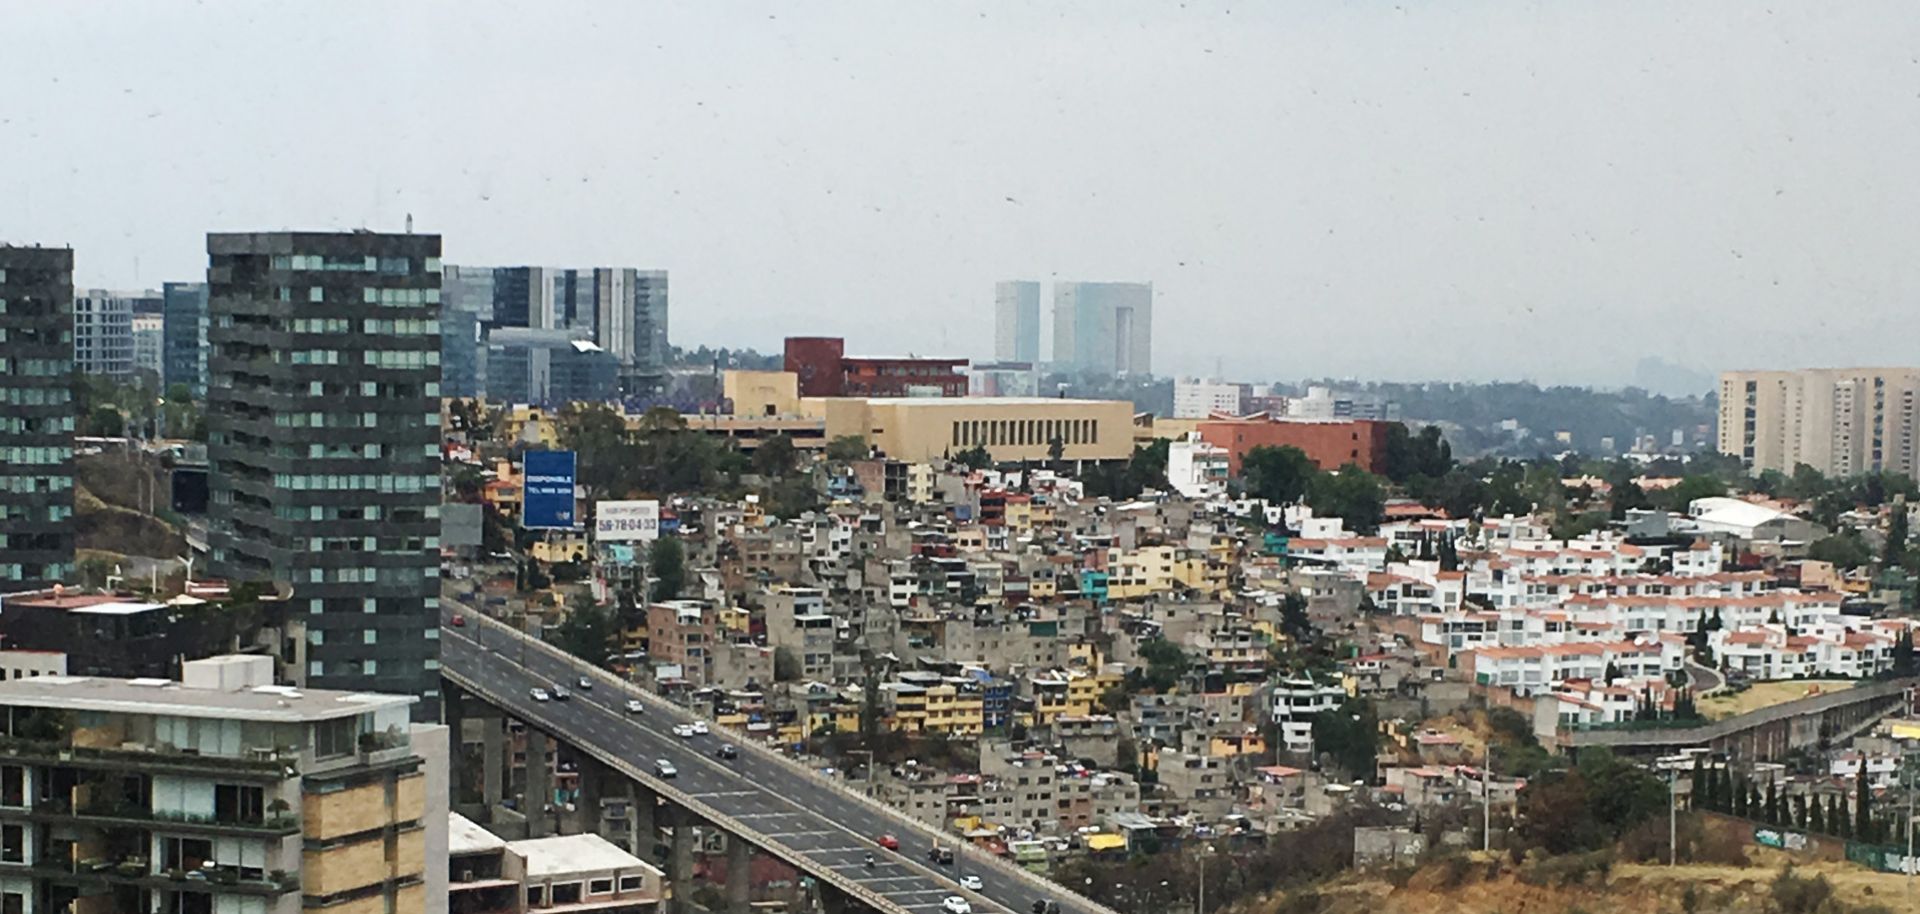 A freeway divides rich and poor sections of Santa Fe, Mexico City. Mexico will be growing in lockstep with the United States, with the potential to join the top 10 economies in the world within a matter of years. But the time has come for Mexico to face its demons.